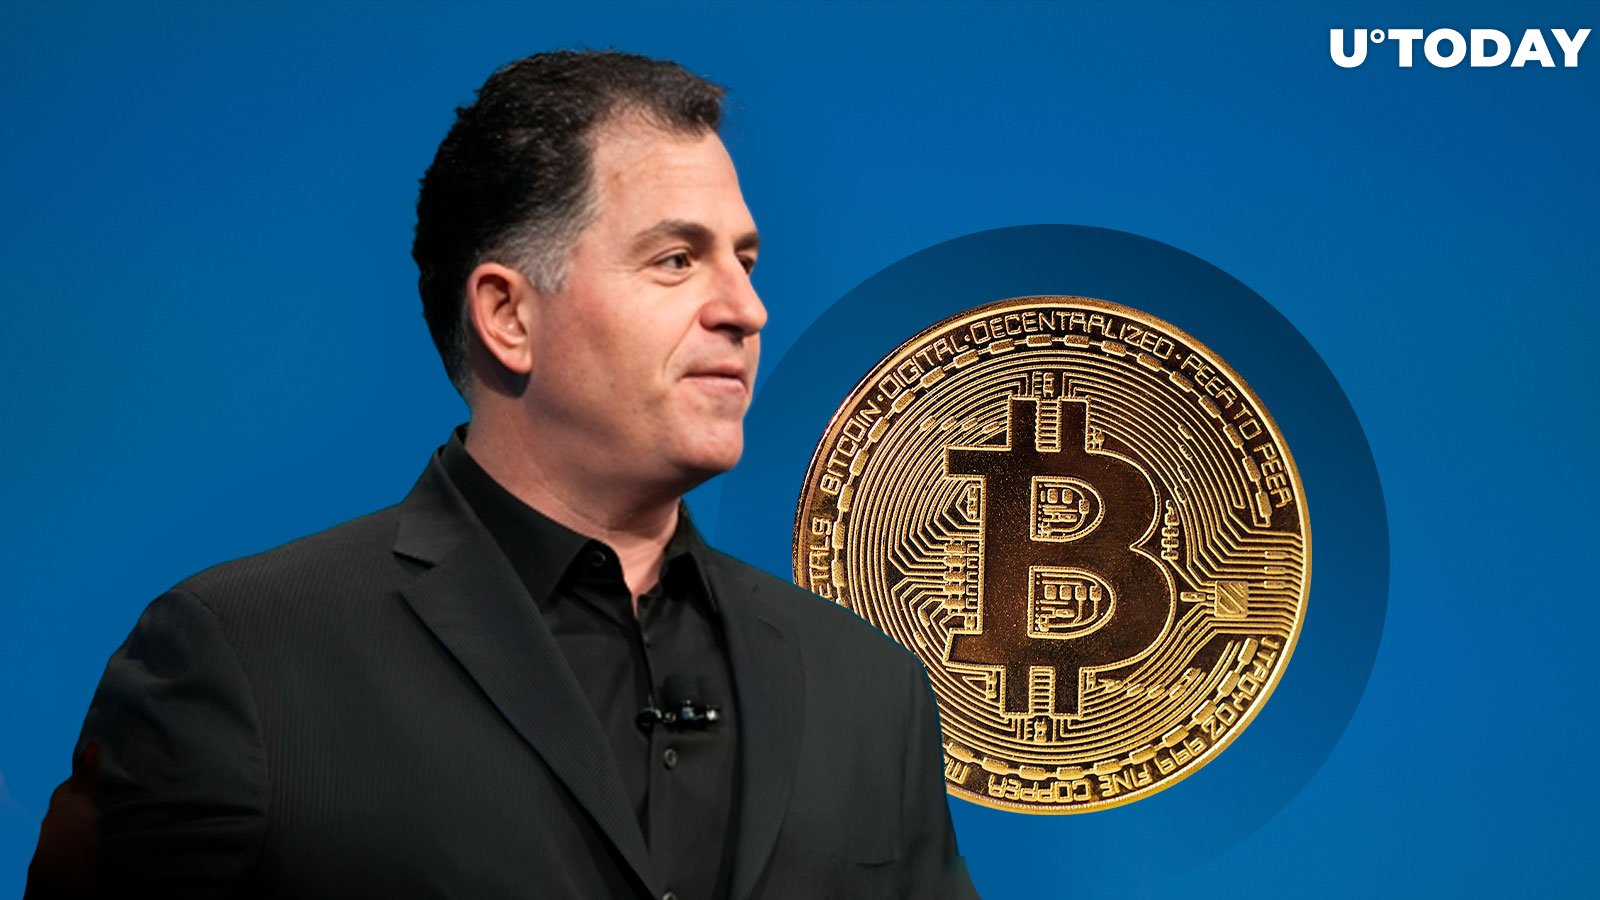 Bitcoin Community Speculates About Michael Dell Buying Bitcoin